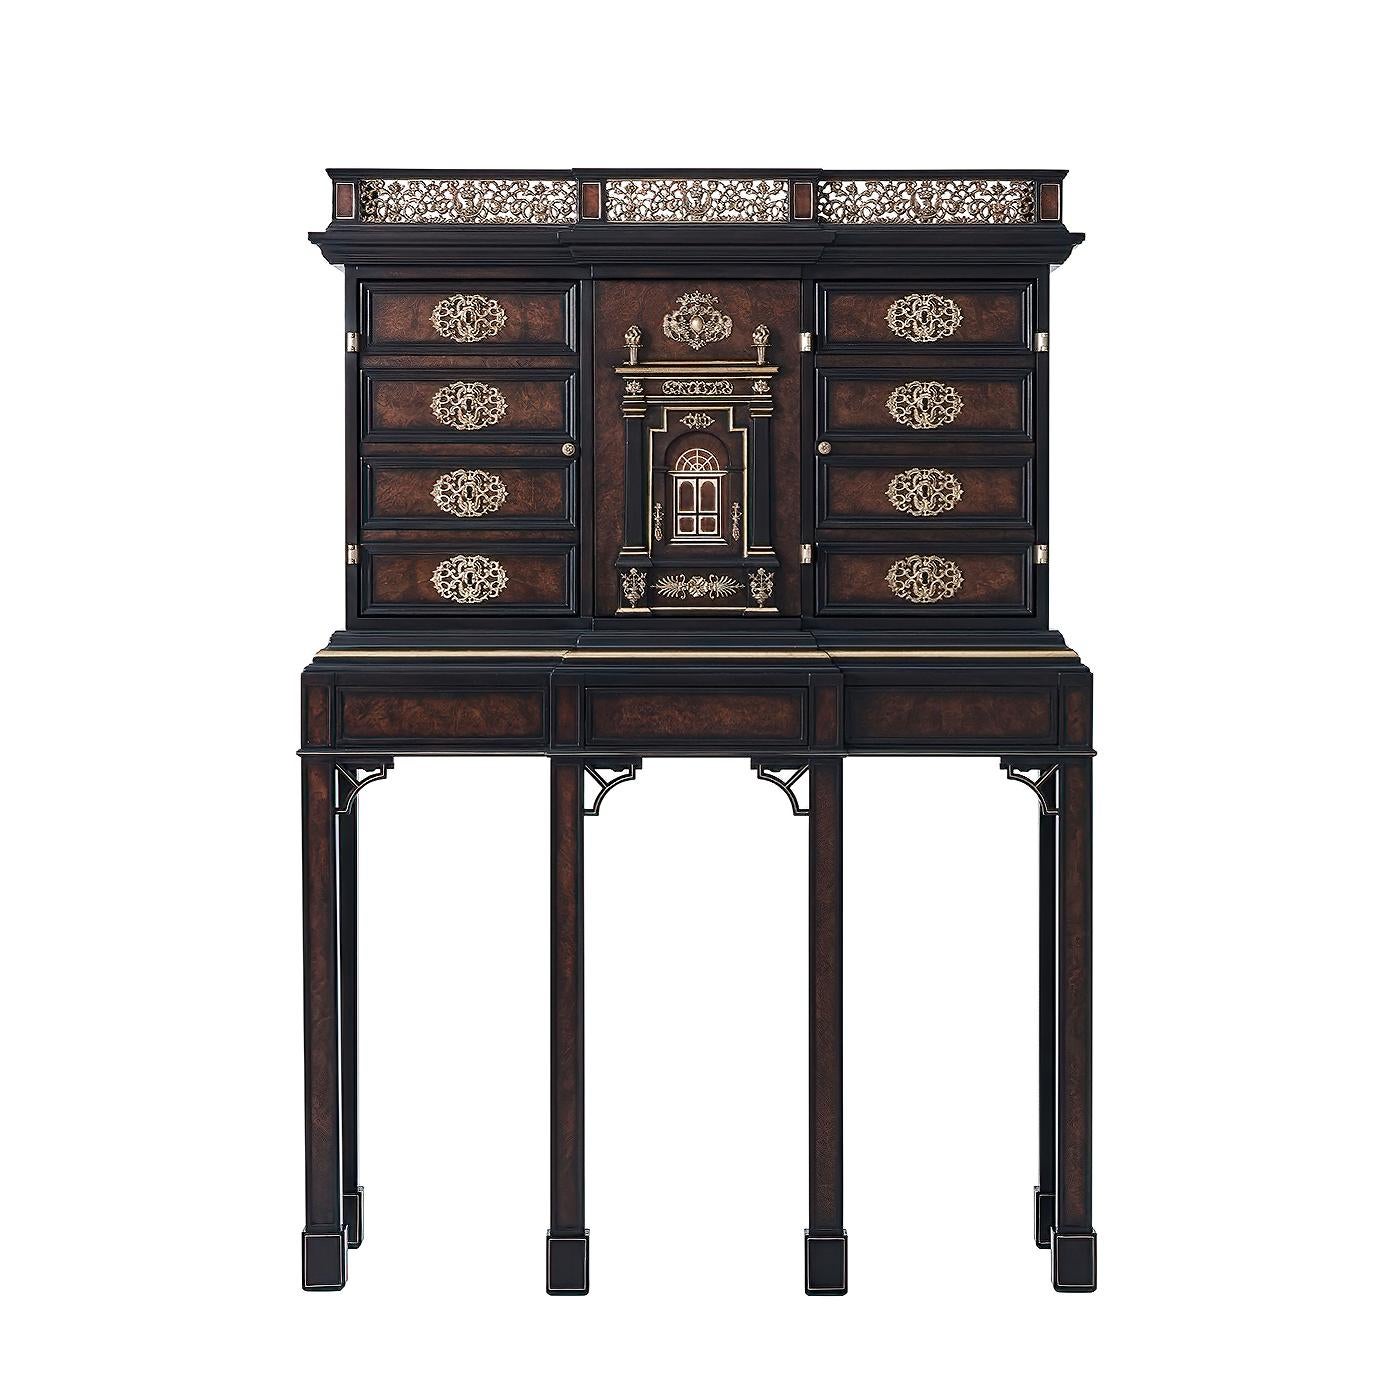 A mahogany, chestnut burl veneered, parcel gilt and finely brass decorated Bar cabinet, the pierced brass gallery top above two faux drawer fronted cabinet doors and centered by a further doors with a columned grand entrance with finely cast and